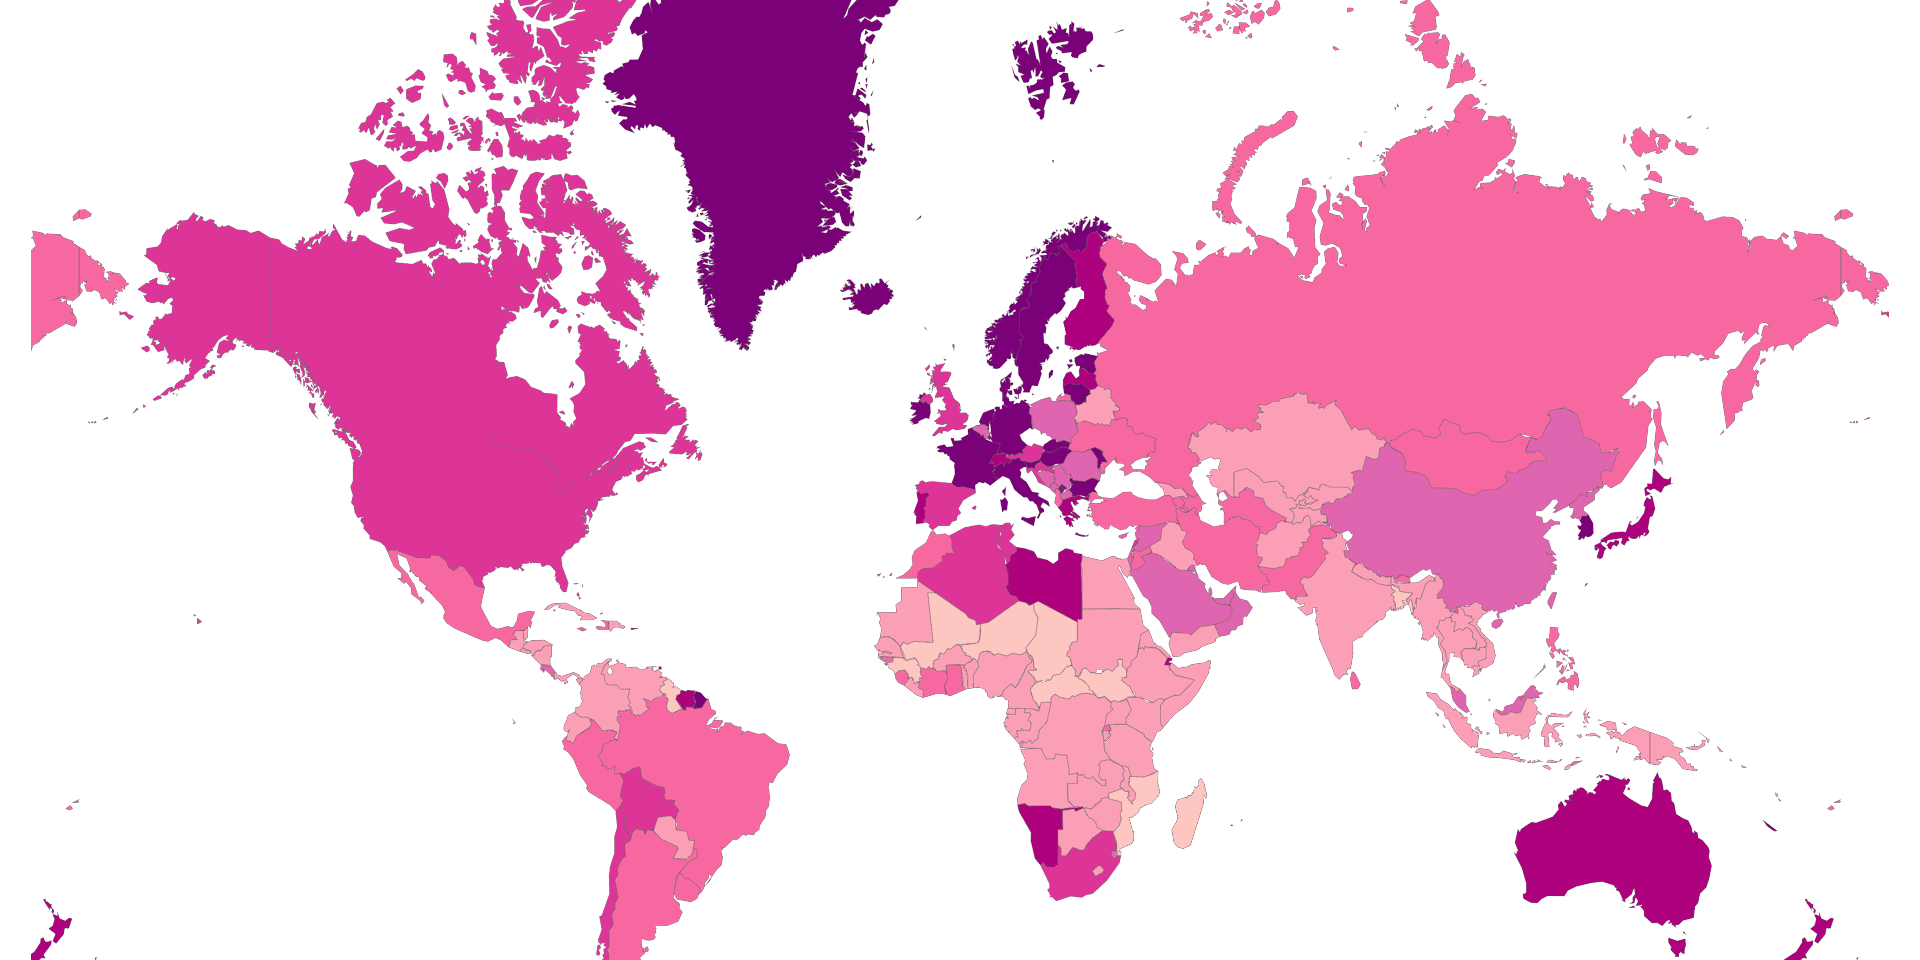 Average Age At First Marriage, Females, By Country